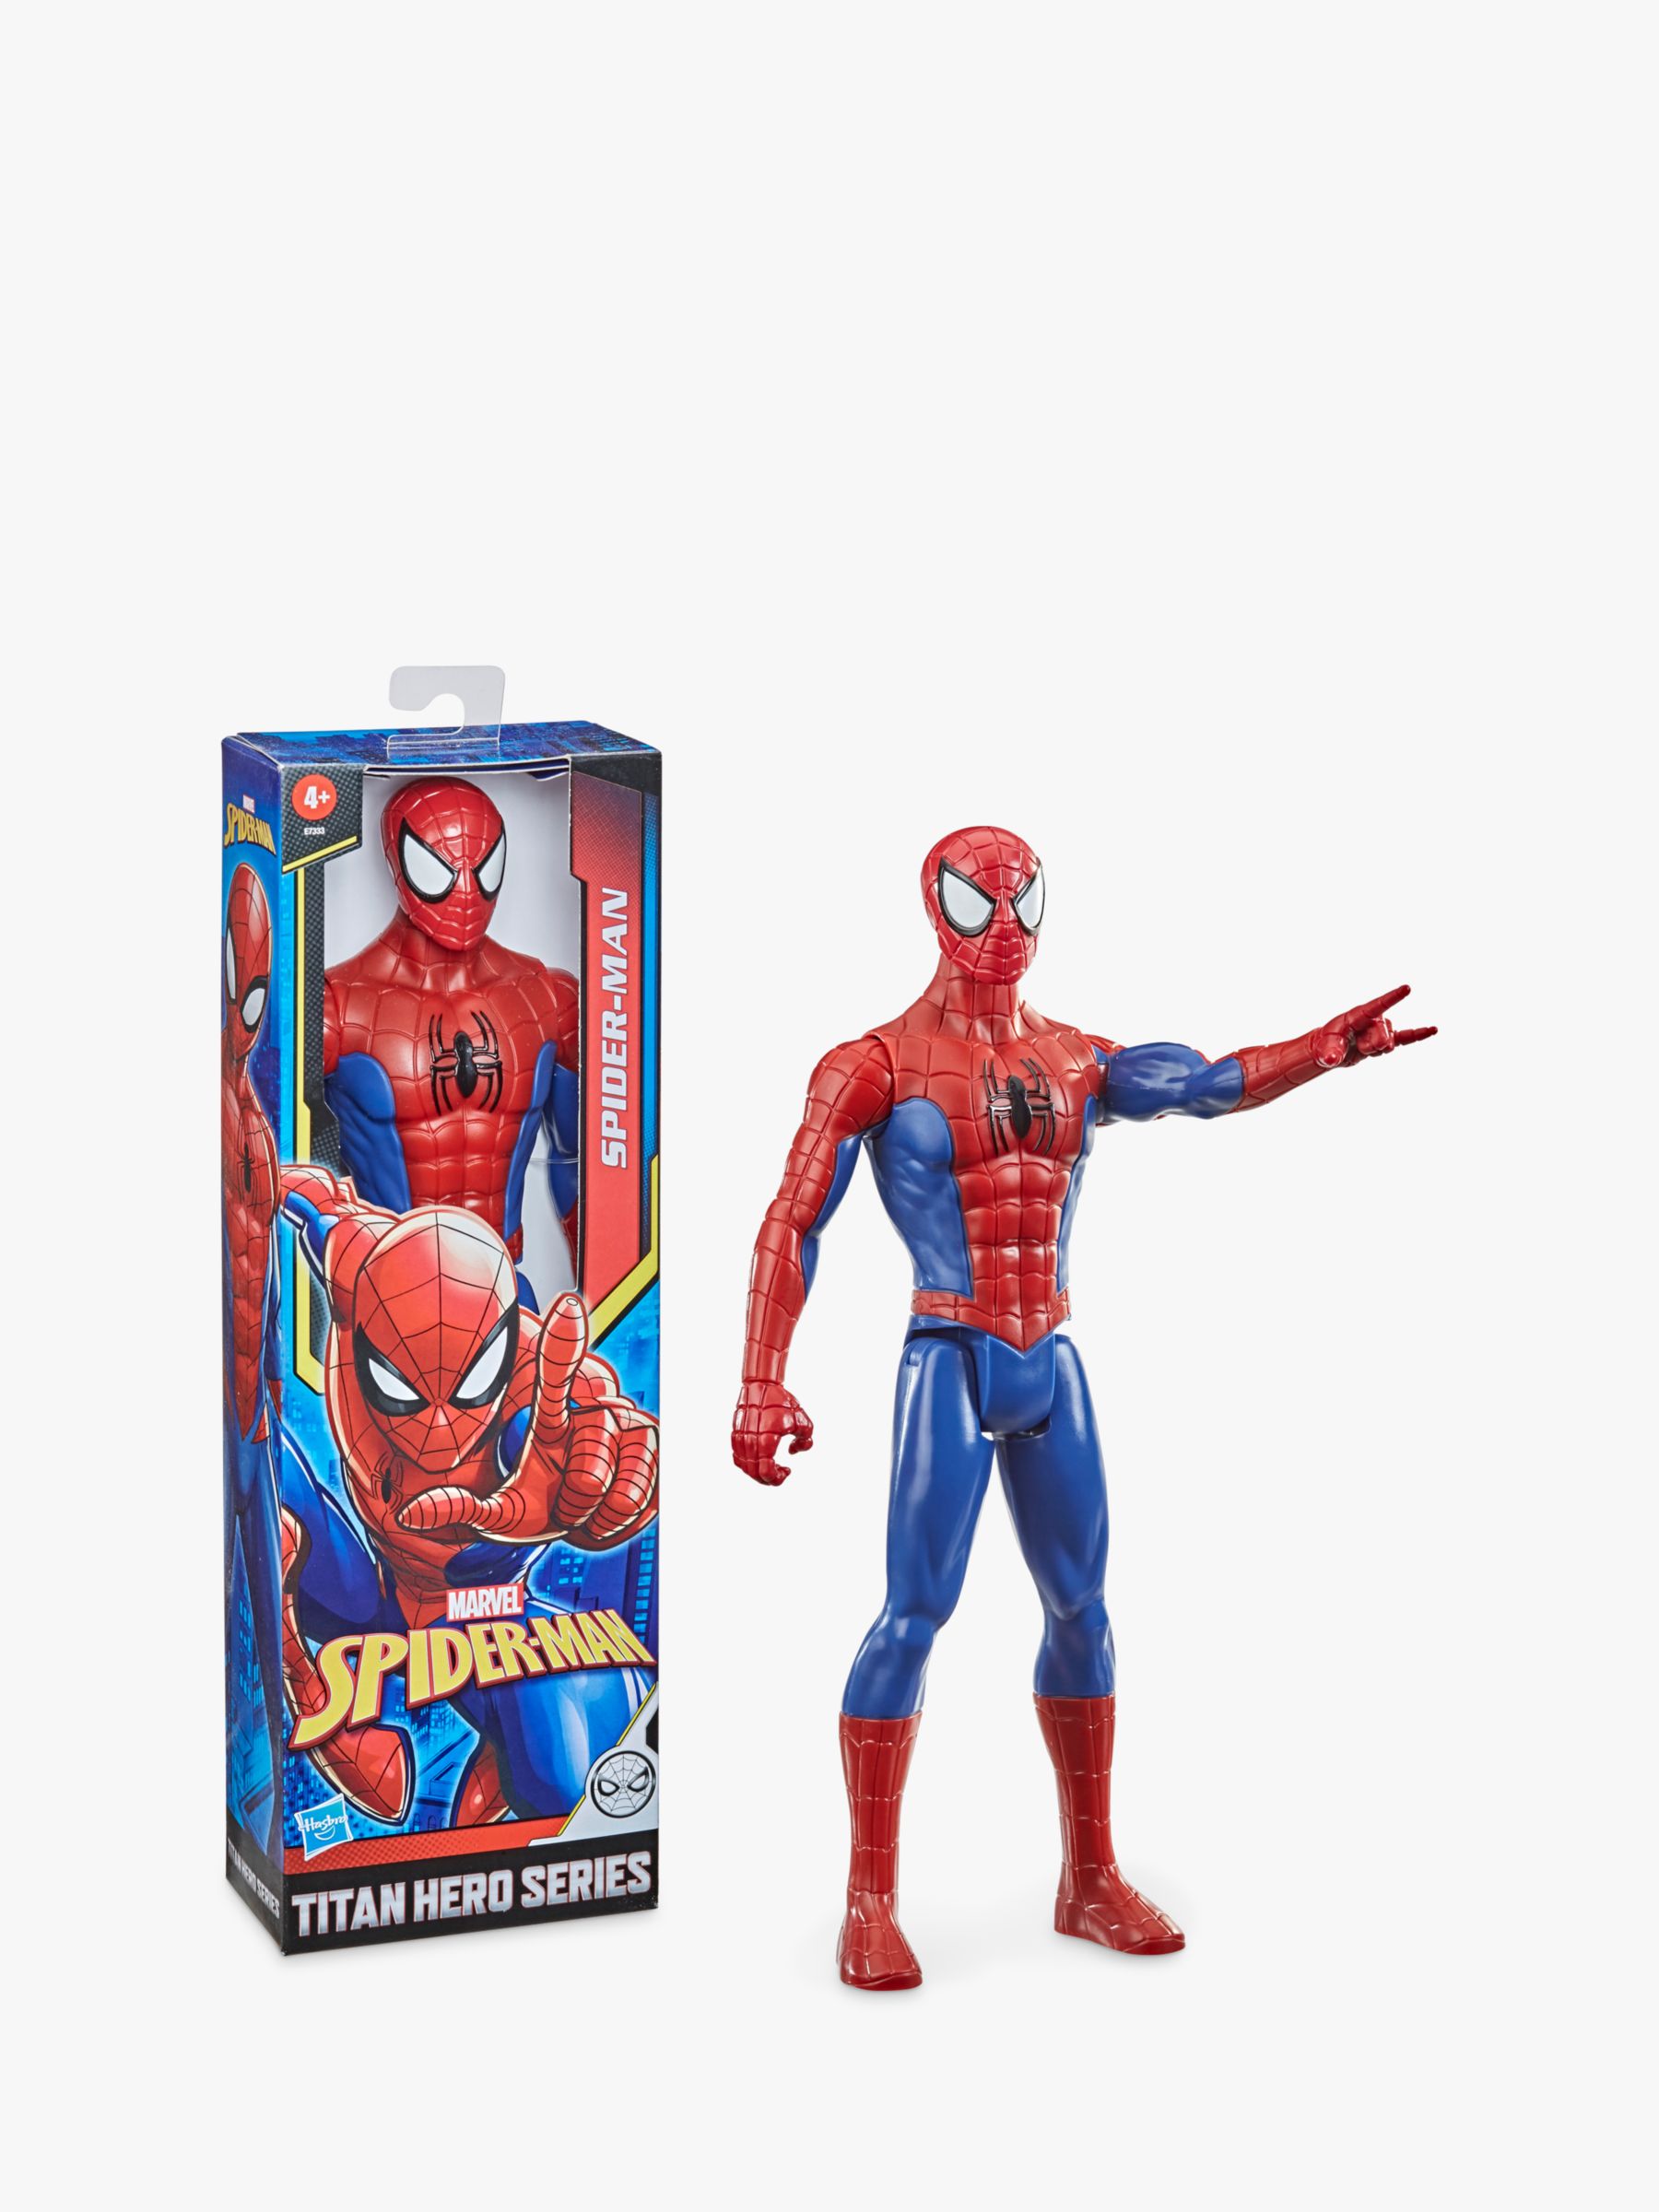 Marvel Spider-Man Far from Home Spider FX Mask Roleplay, Super Hero Toys,  Easter Basket Stuffers or Gifts for Kids, Ages 5+ ( Exclusive)